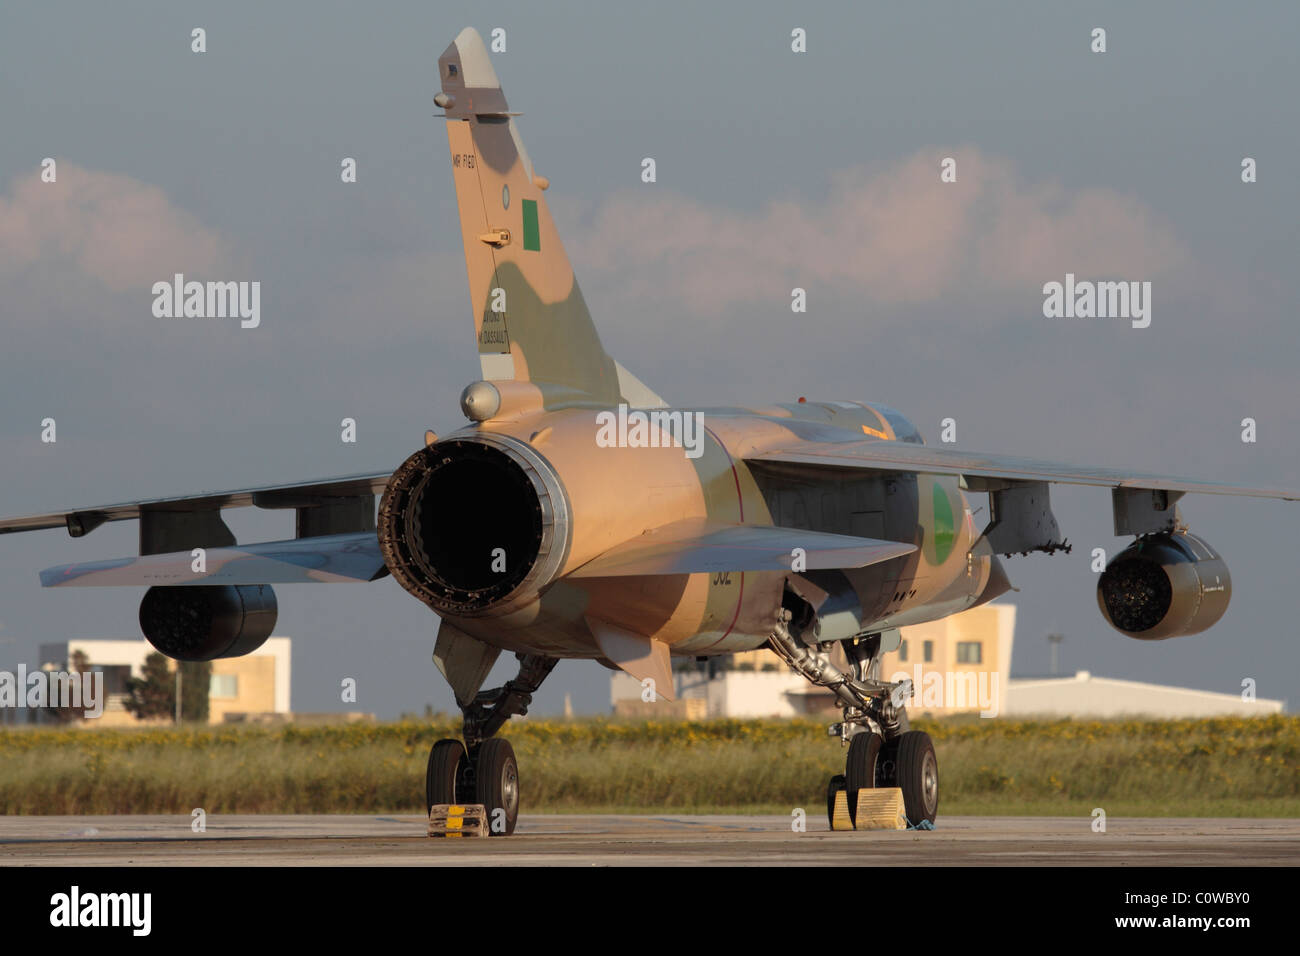 One of two Libyan Air Force Mirage F1s whose pilots defected to Malta on 21 February 2011 during the uprising against Muammar Gaddafi. Stock Photo